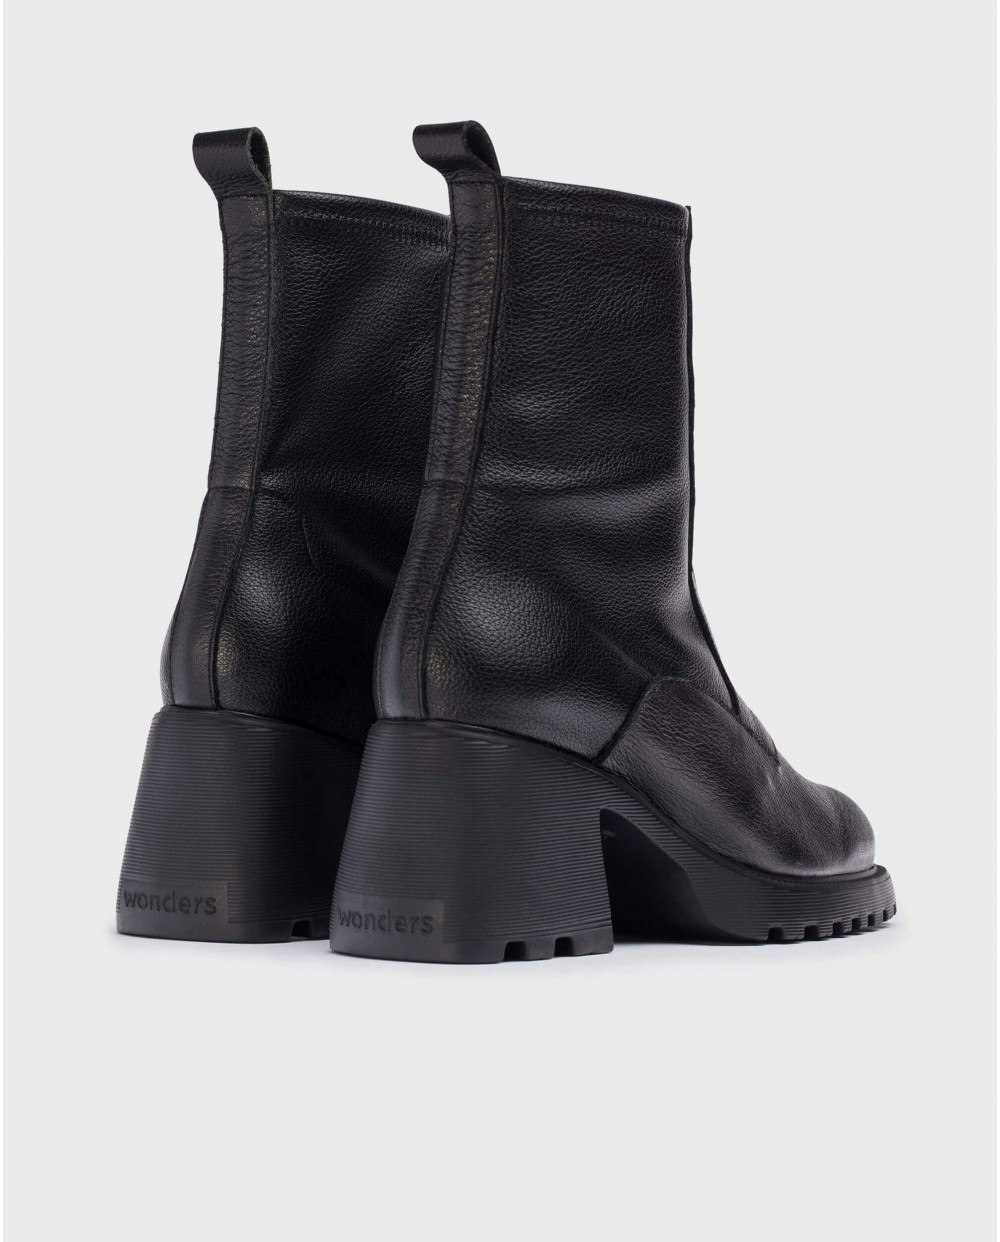 Wonders-Ankle Boots-Black KID ankle boot